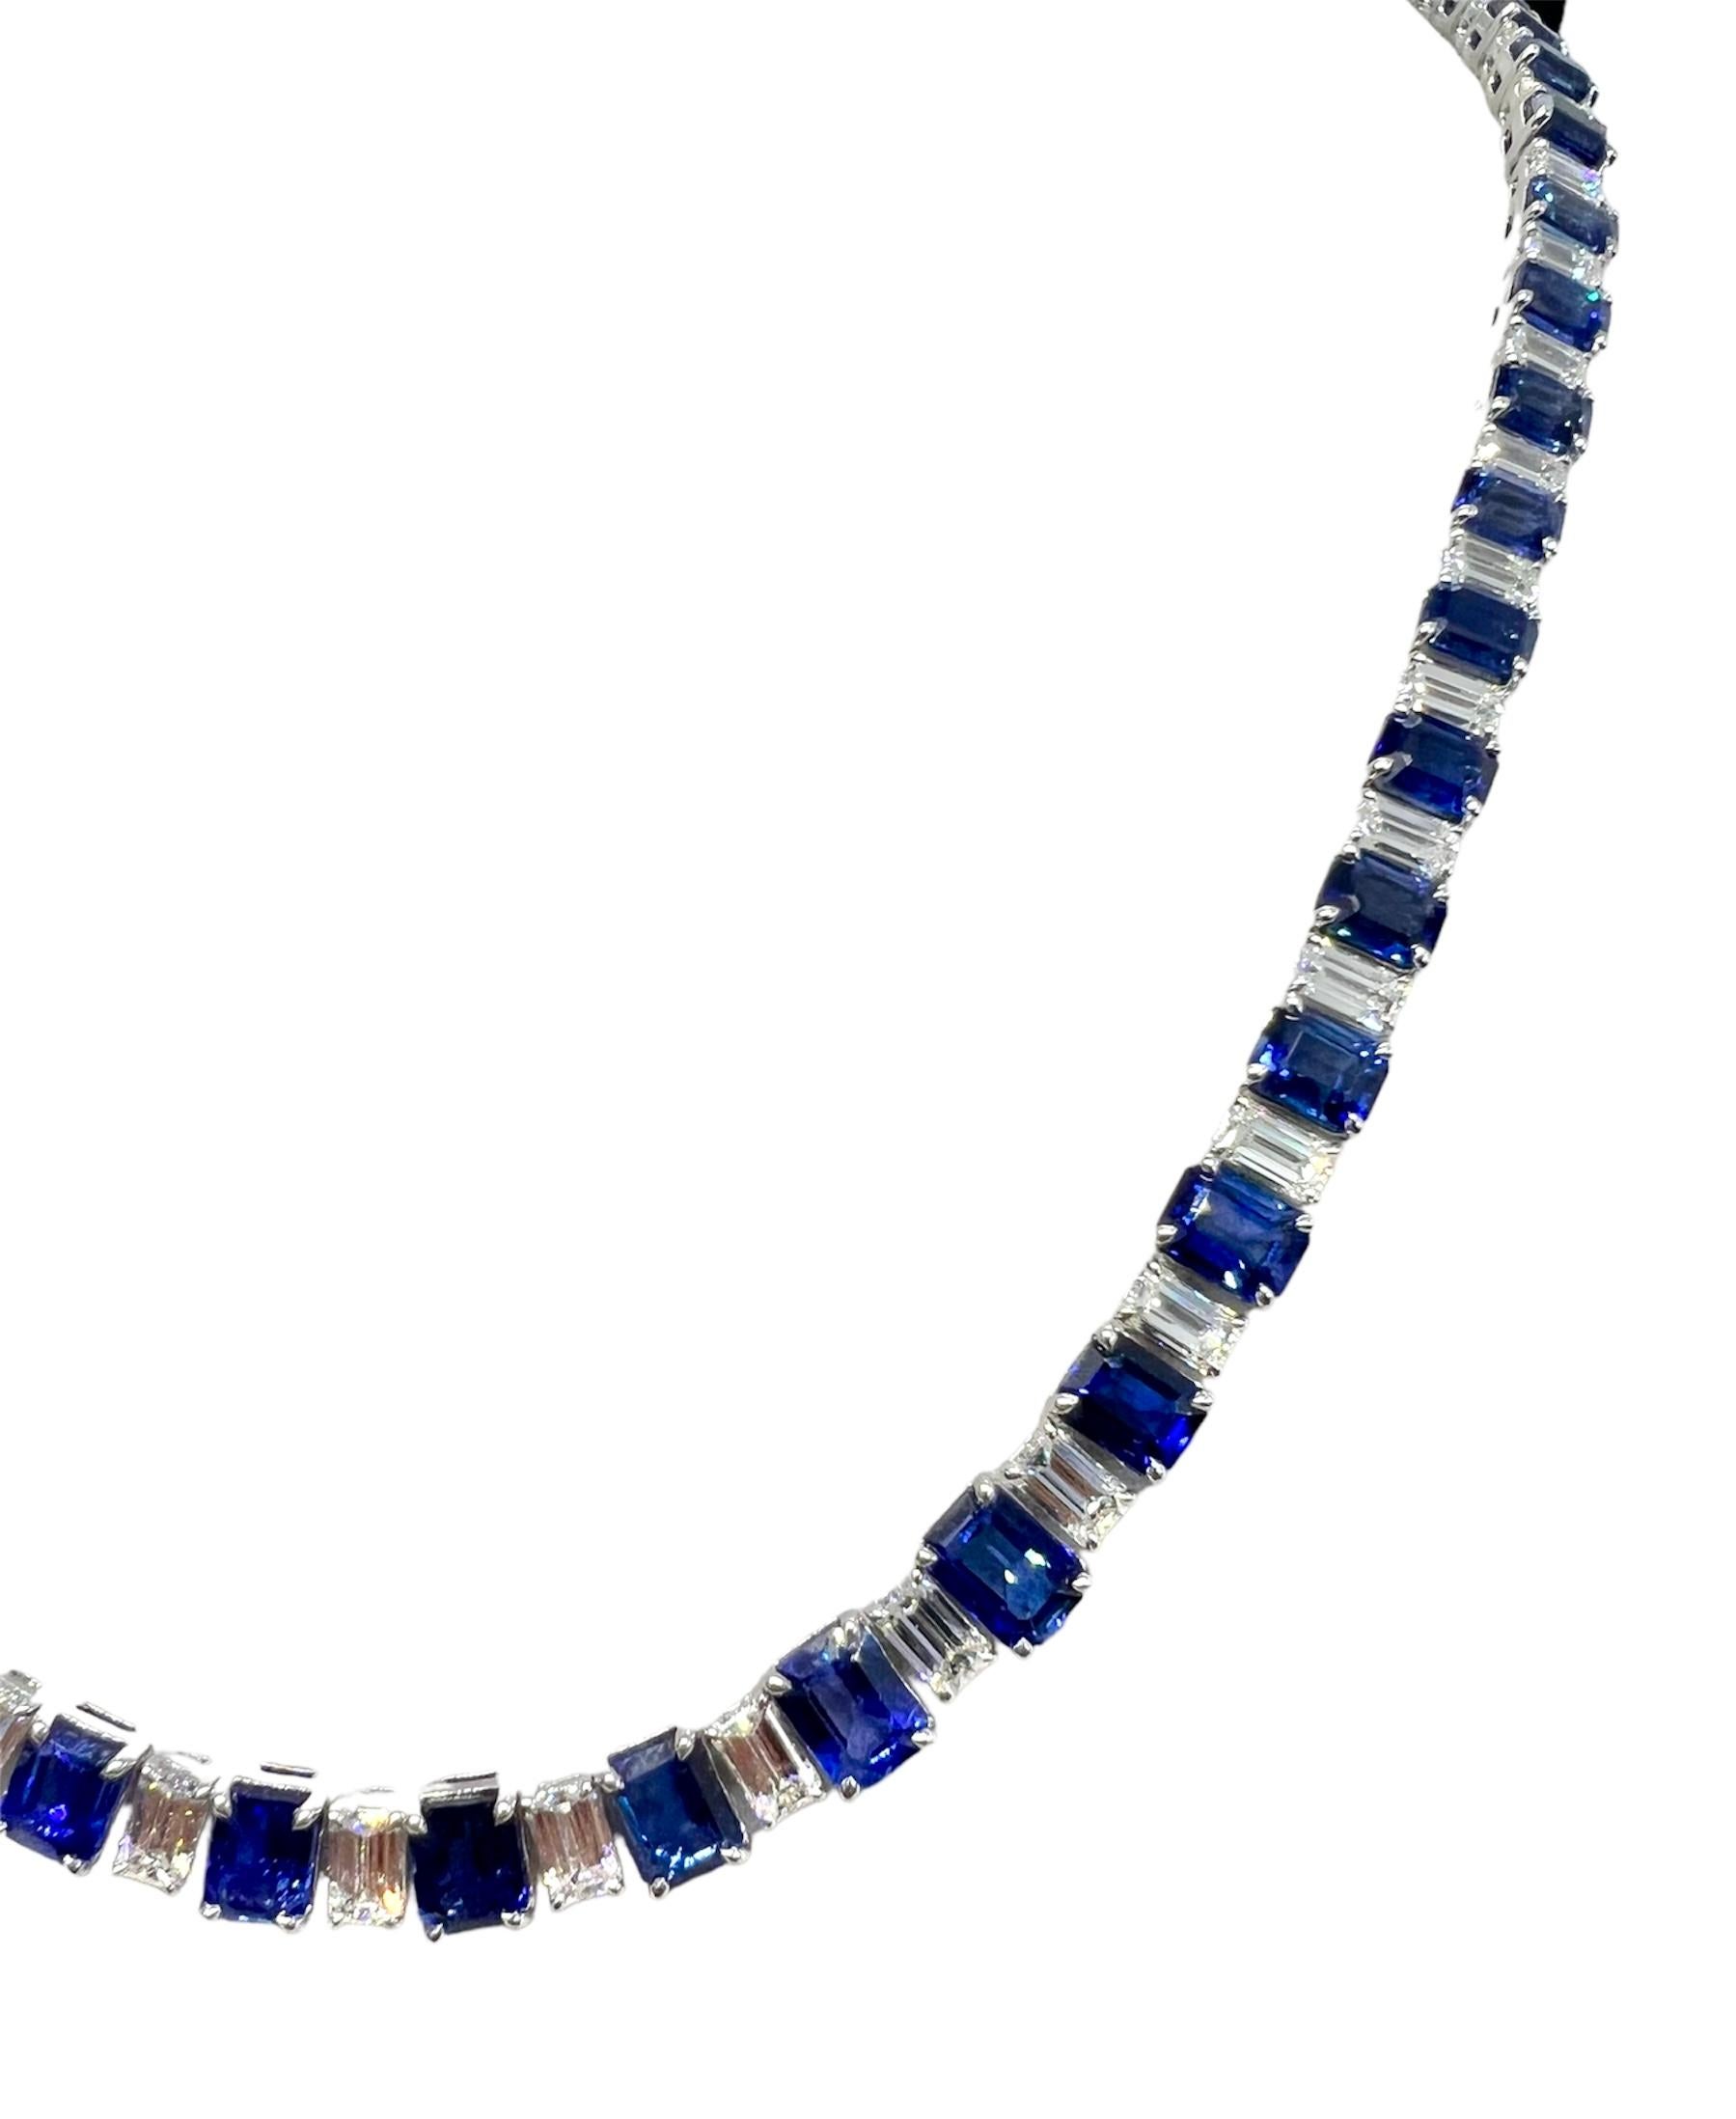 A platinum necklace with 10.96 carat diamonds and 32.24 carat blue sapphire.

Sophia D by Joseph Dardashti LTD has been known worldwide for 35 years and are inspired by classic Art Deco design that merges with modern manufacturing techniques.
